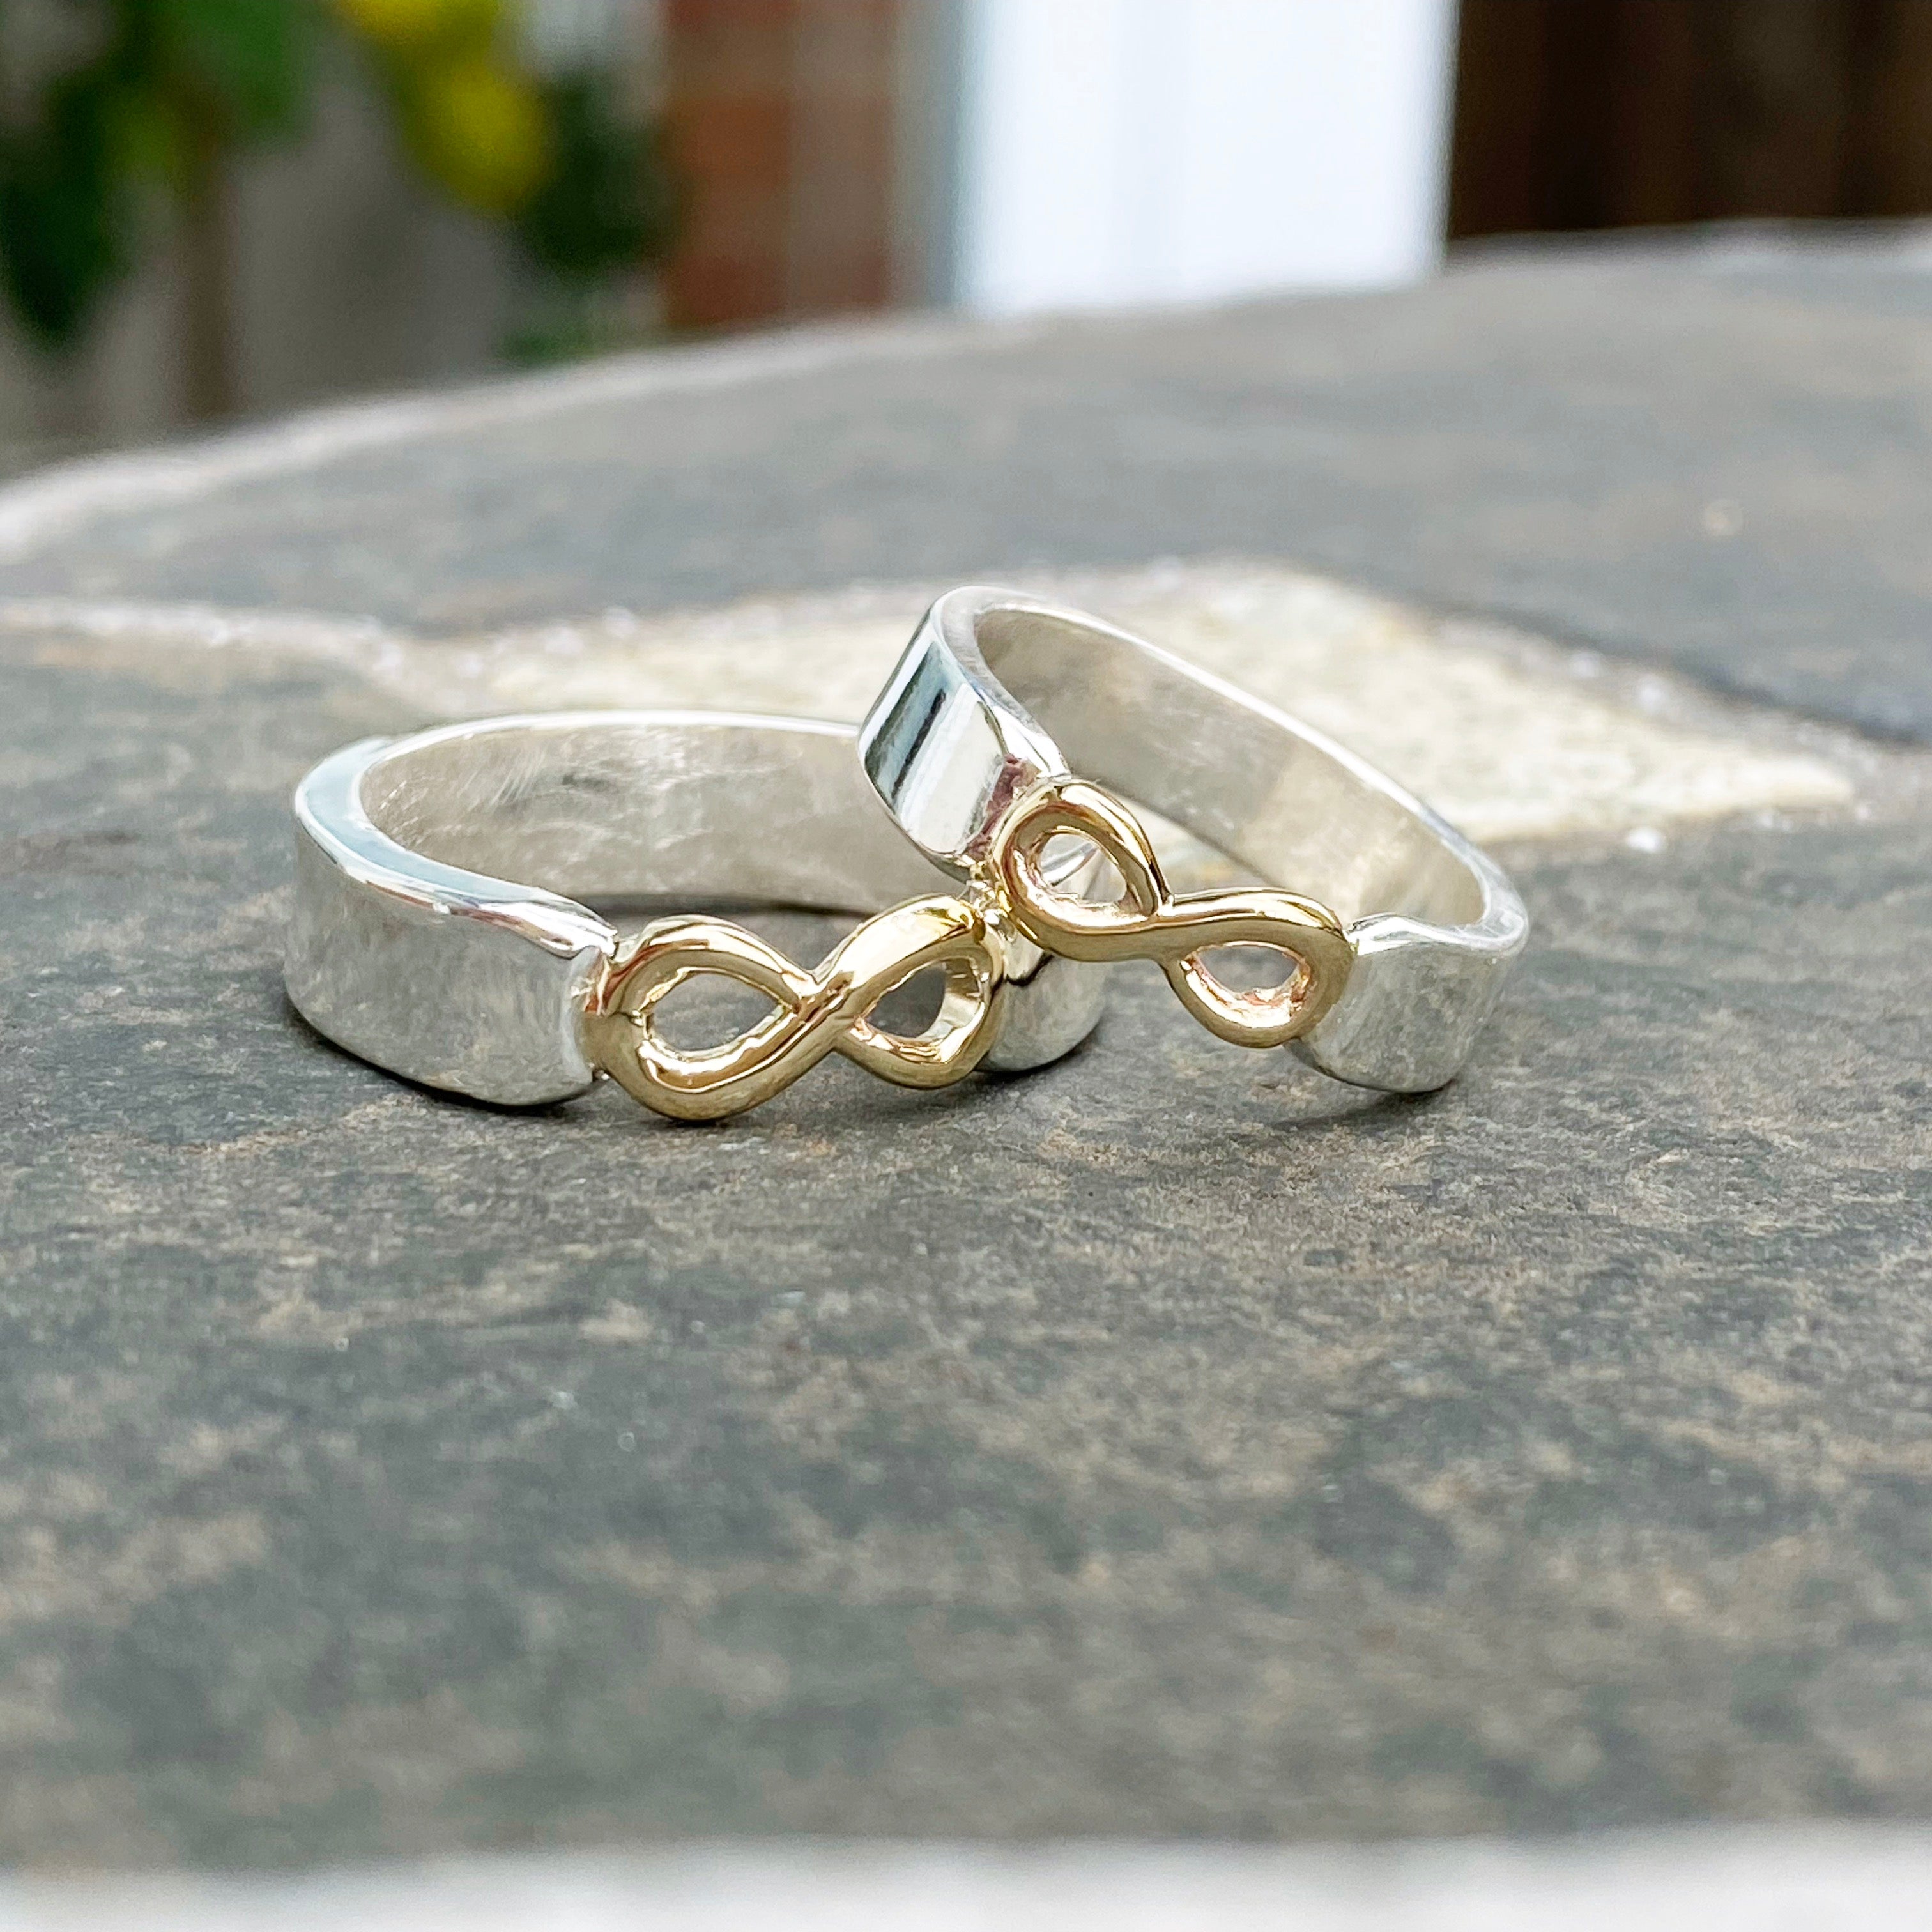 14K Gold Infinity Ring. Wholesale Sterling Silver Ring - 925Express